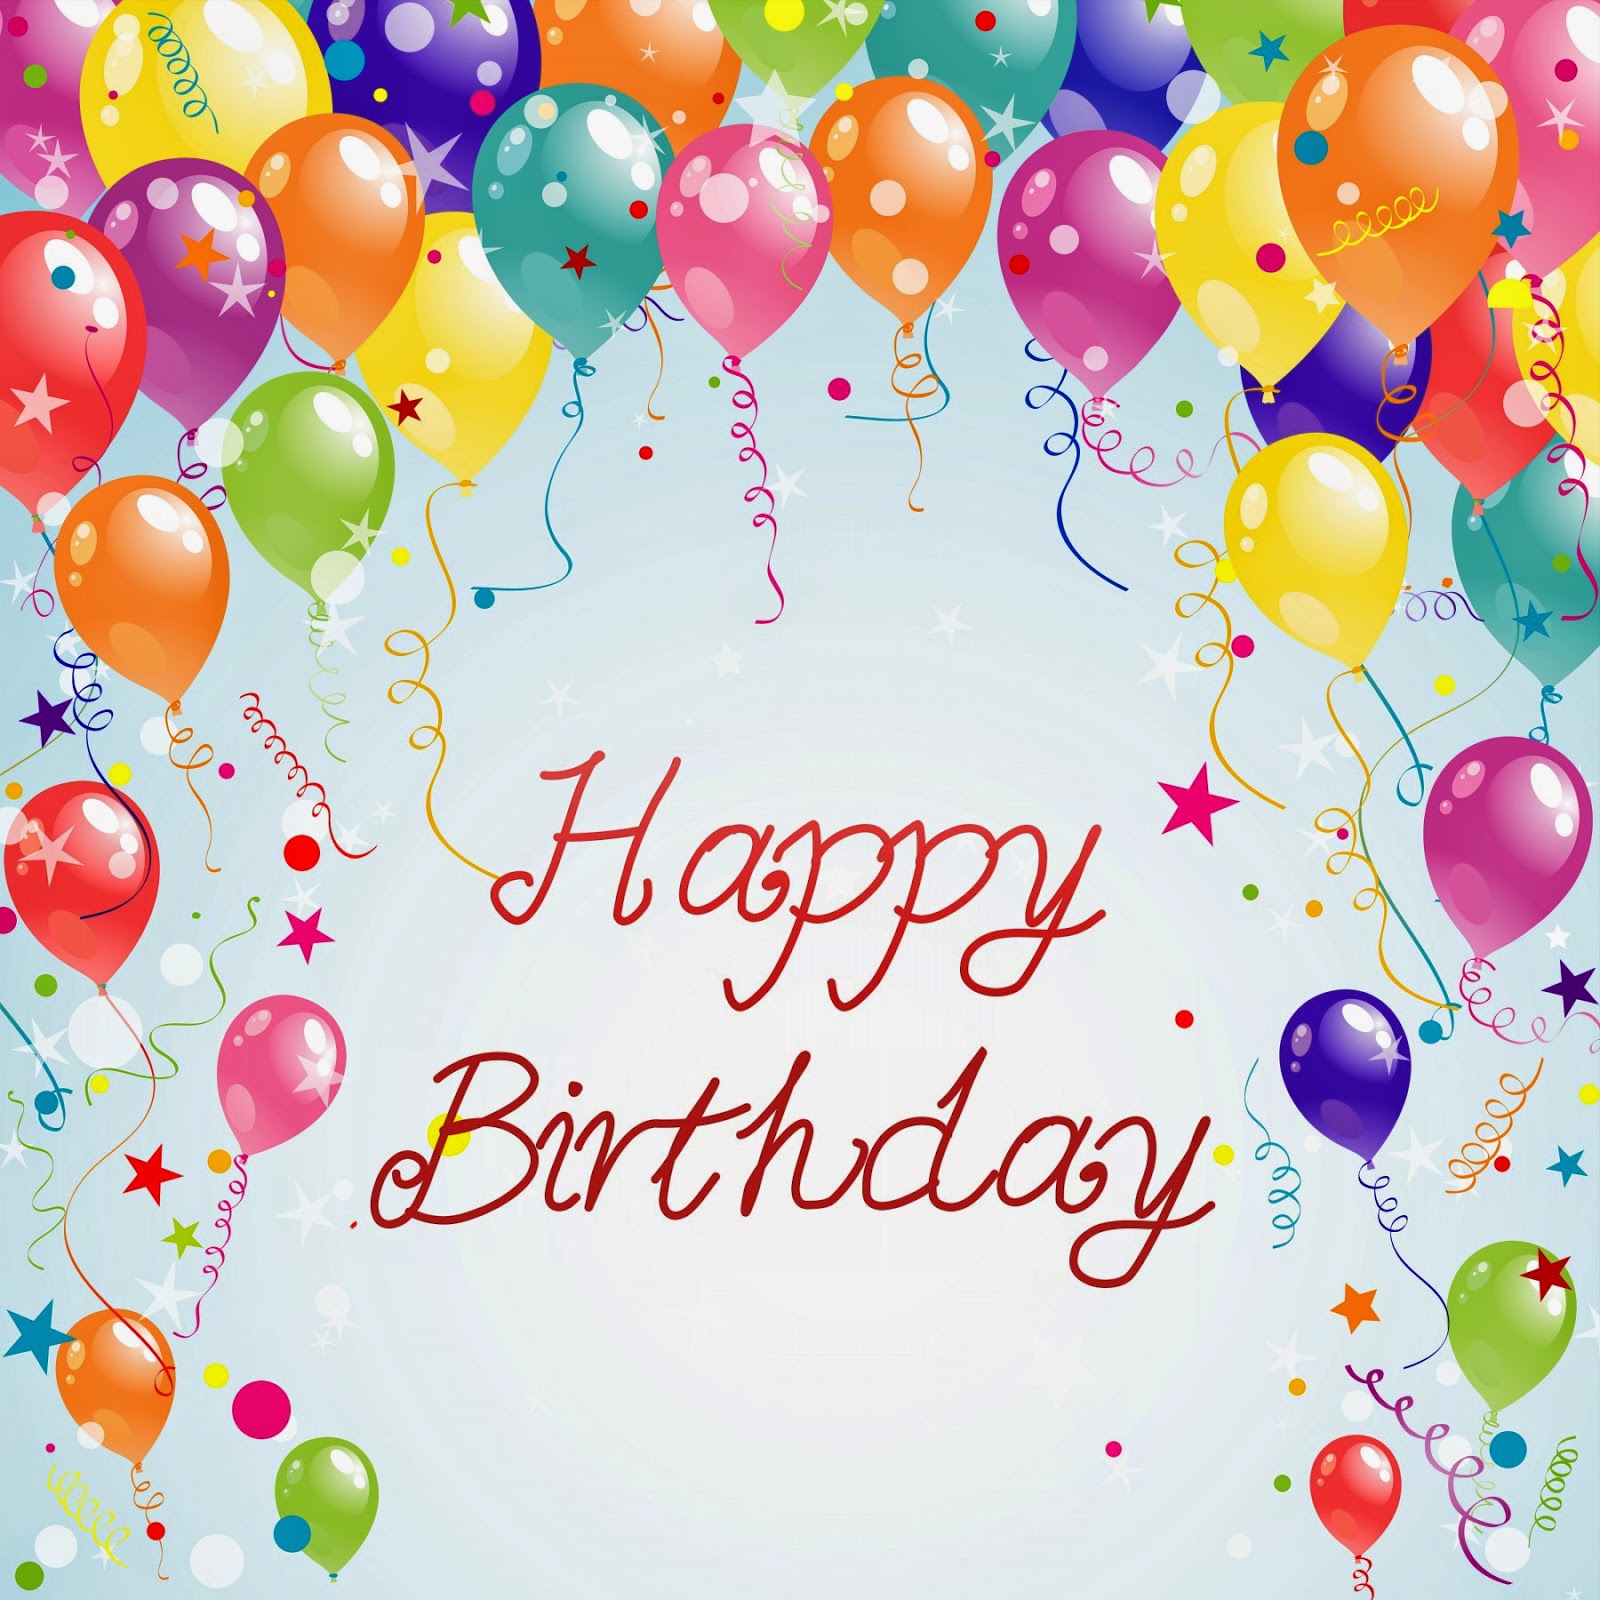 Color-beautiful-birthday-card-with-balloons.jpg